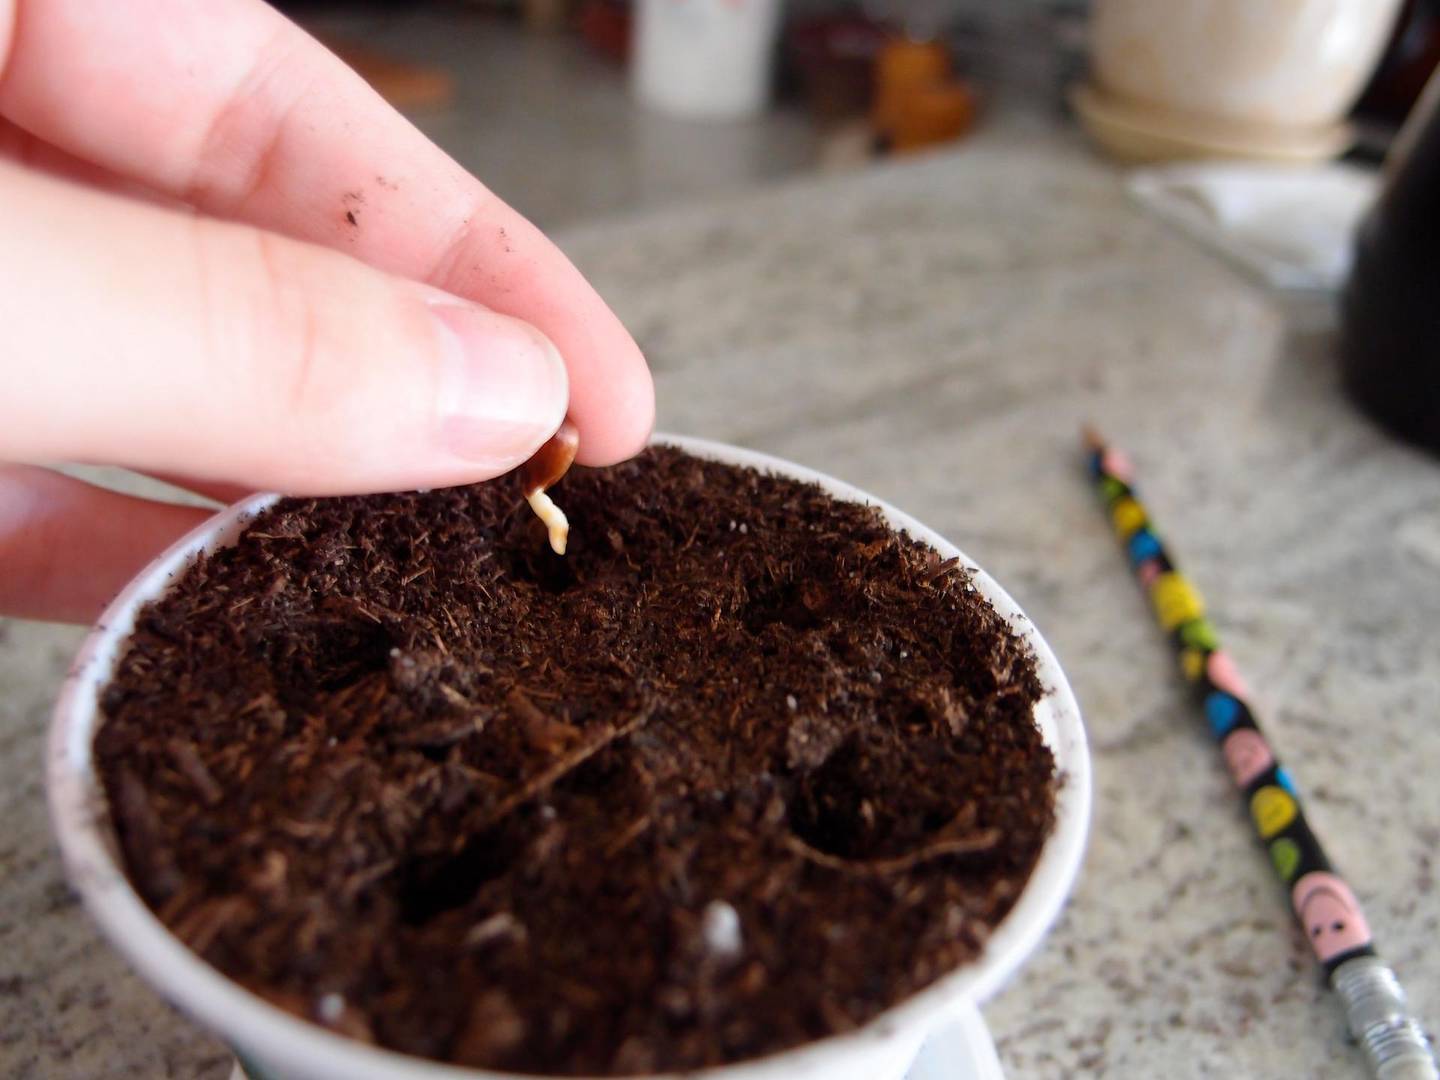 Drop seeds into holes roughly 1cm deep and 1cm apart. Courtesy Experiment Number One